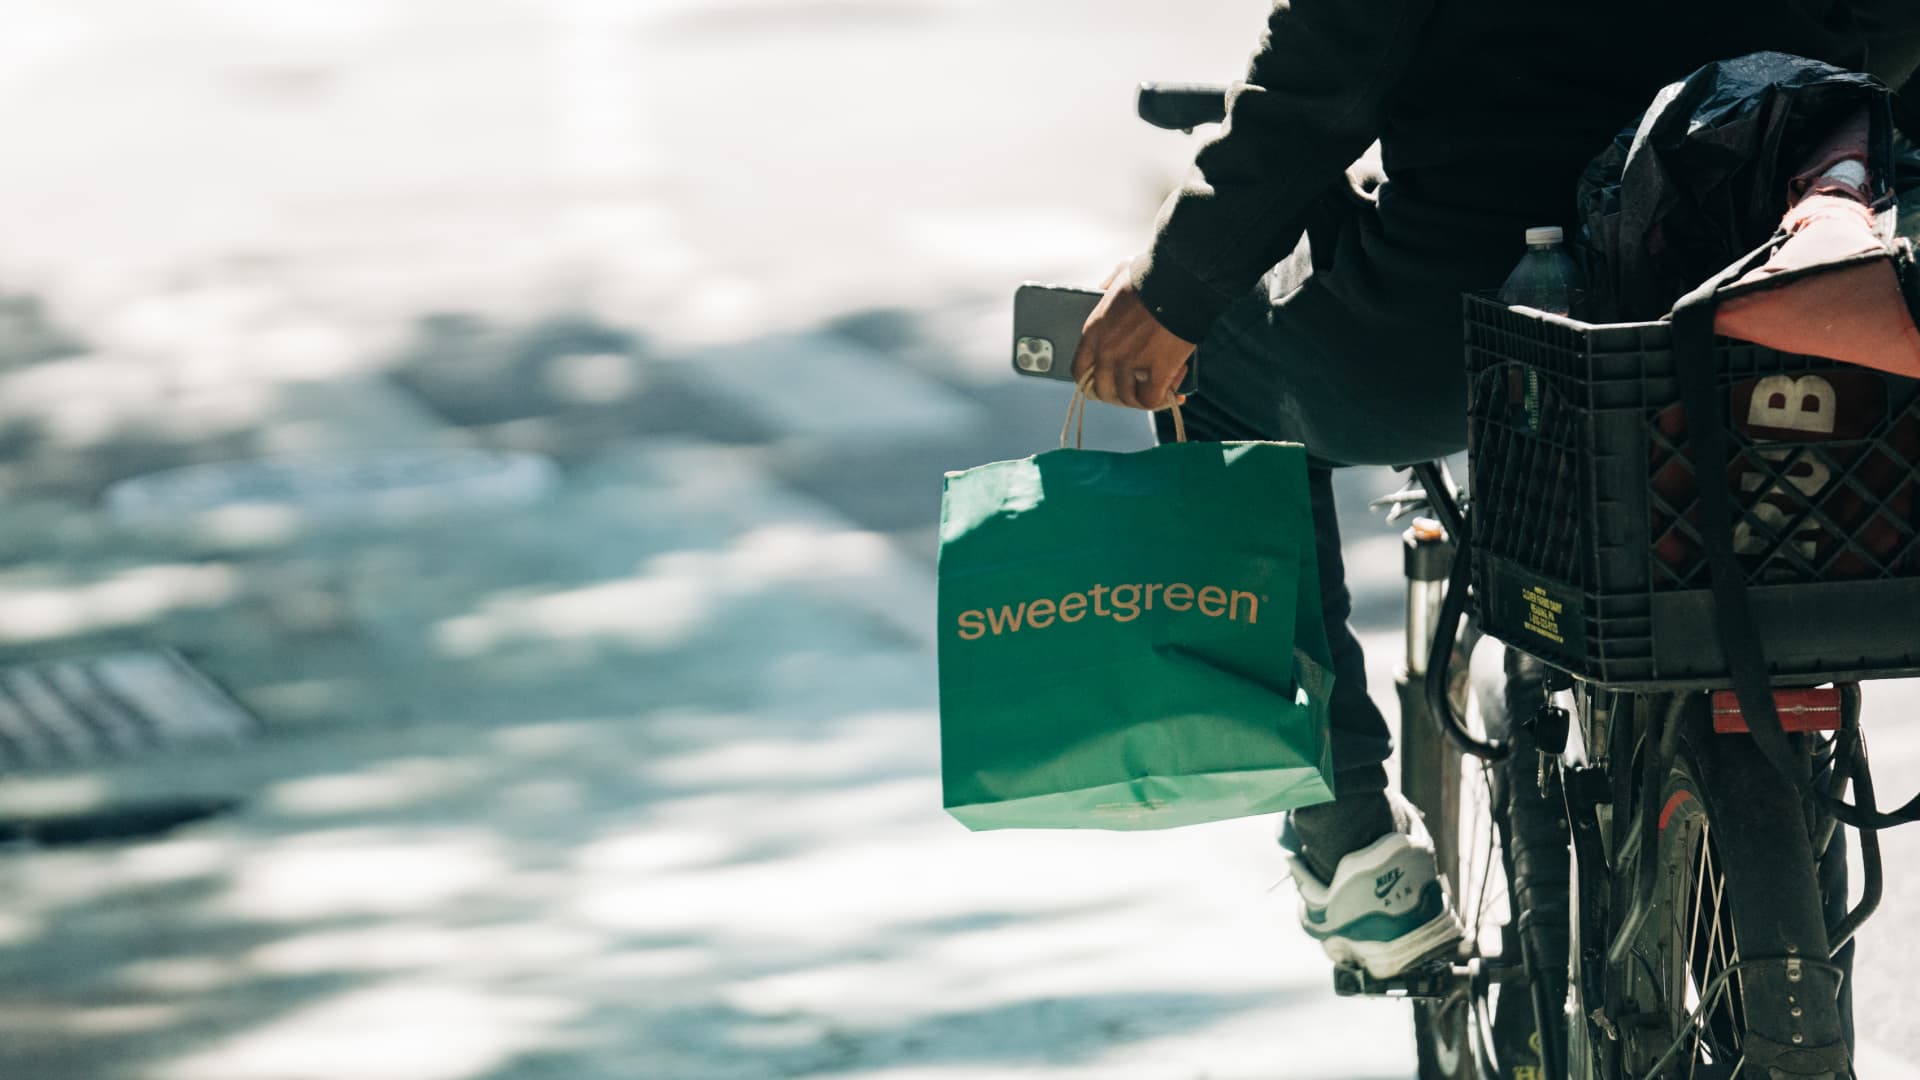 Sweetgreen, Chipotle and Wingstop aren’t seeing a consumer slowdown [Video]